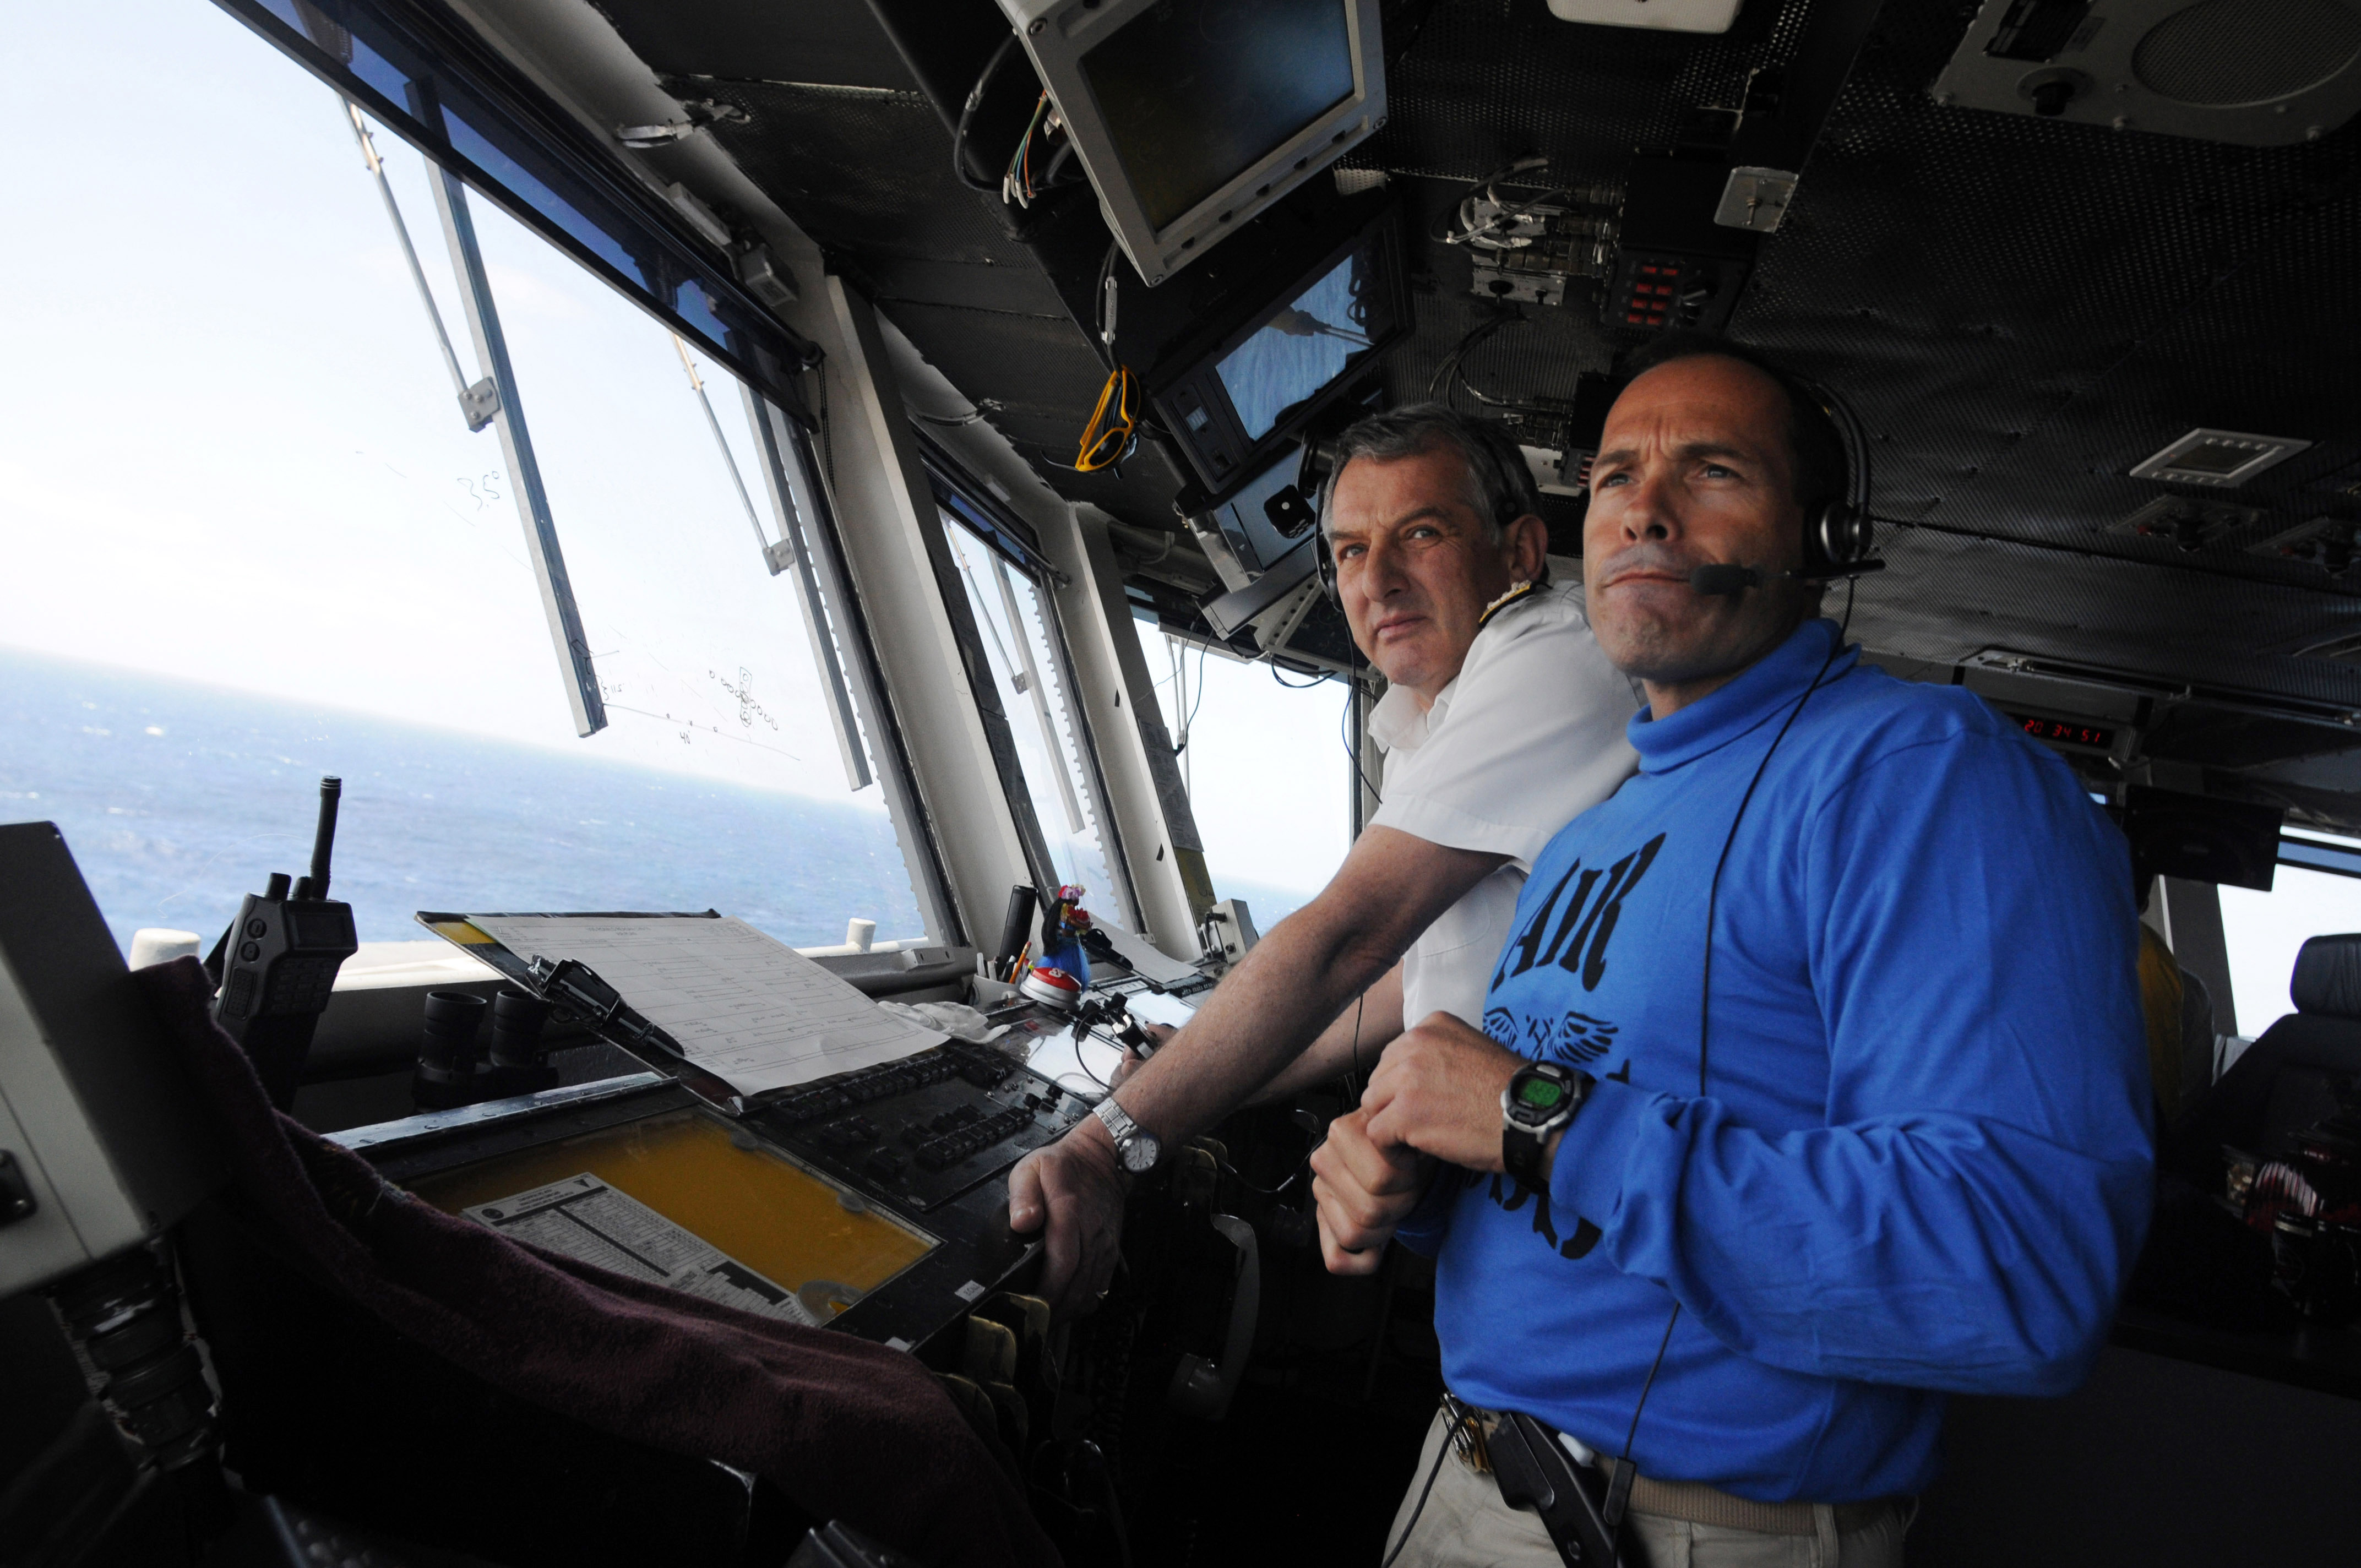 US Navy 090416-N-3610L-260 Capt. John Breast, air boss aboard the aircraft carrier USS Ronald Reagan (CVN 76), and Adm. Sir Jonathon Band, First Sea Lord and Chief of Naval Staff of the Royal Navy